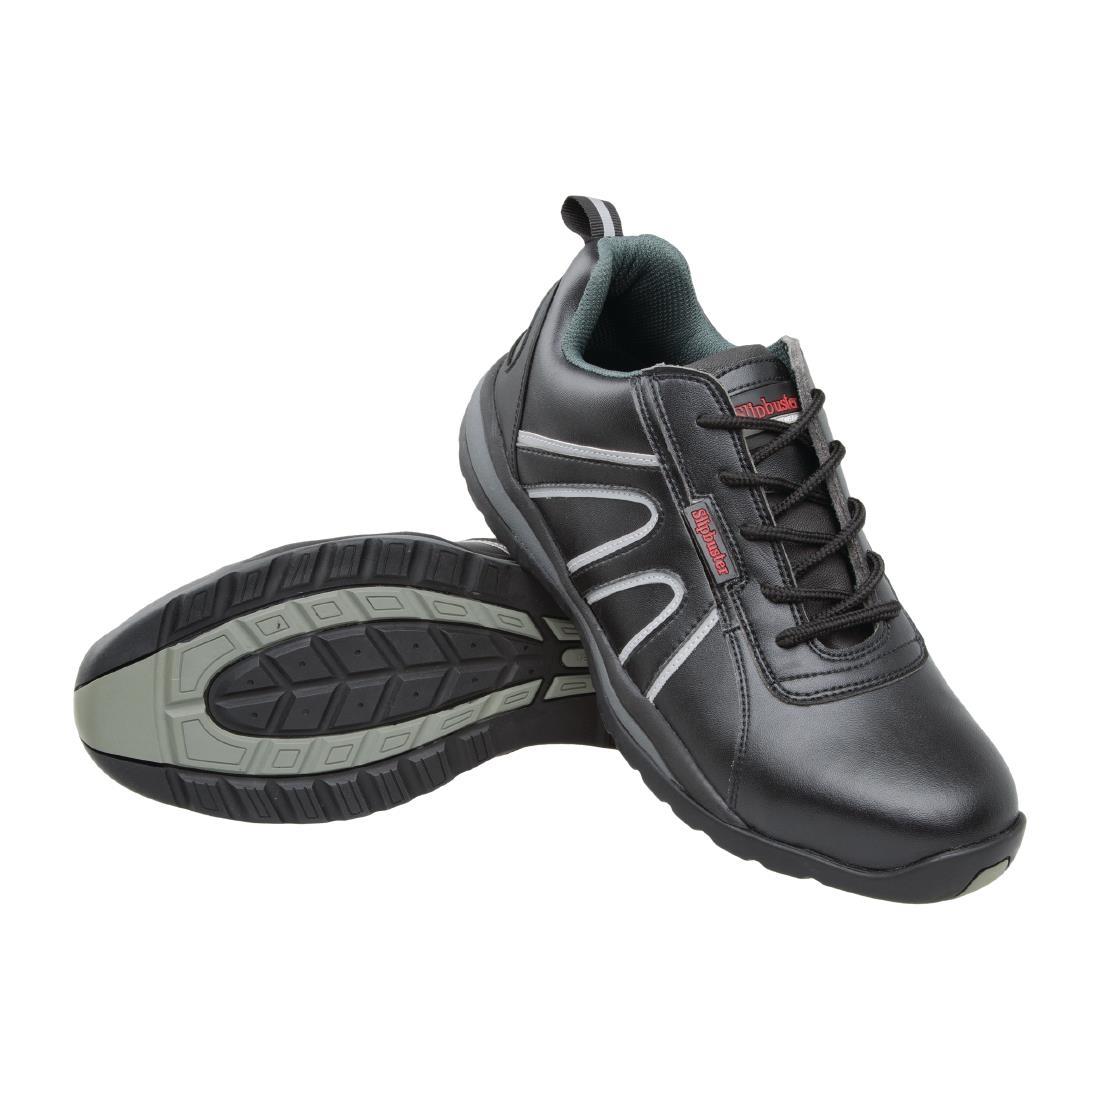 Slipbuster Safety Trainers Black 37 - A708-37  - 2